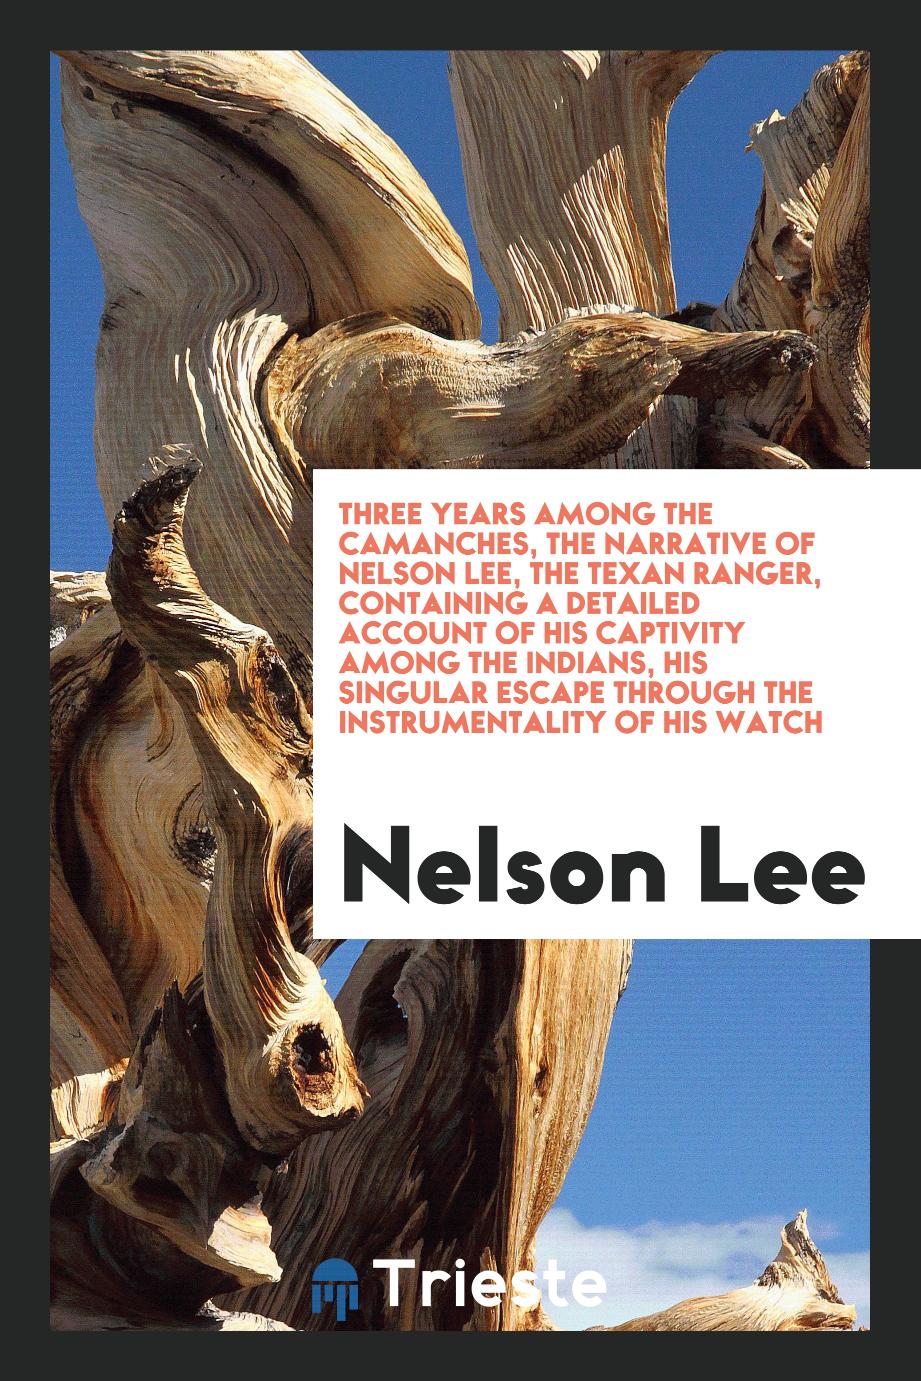 Three Years among the Camanches, the Narrative of Nelson Lee, the Texan Ranger, Containing a Detailed Account of His Captivity among the Indians, His Singular Escape through the Instrumentality of His Watch